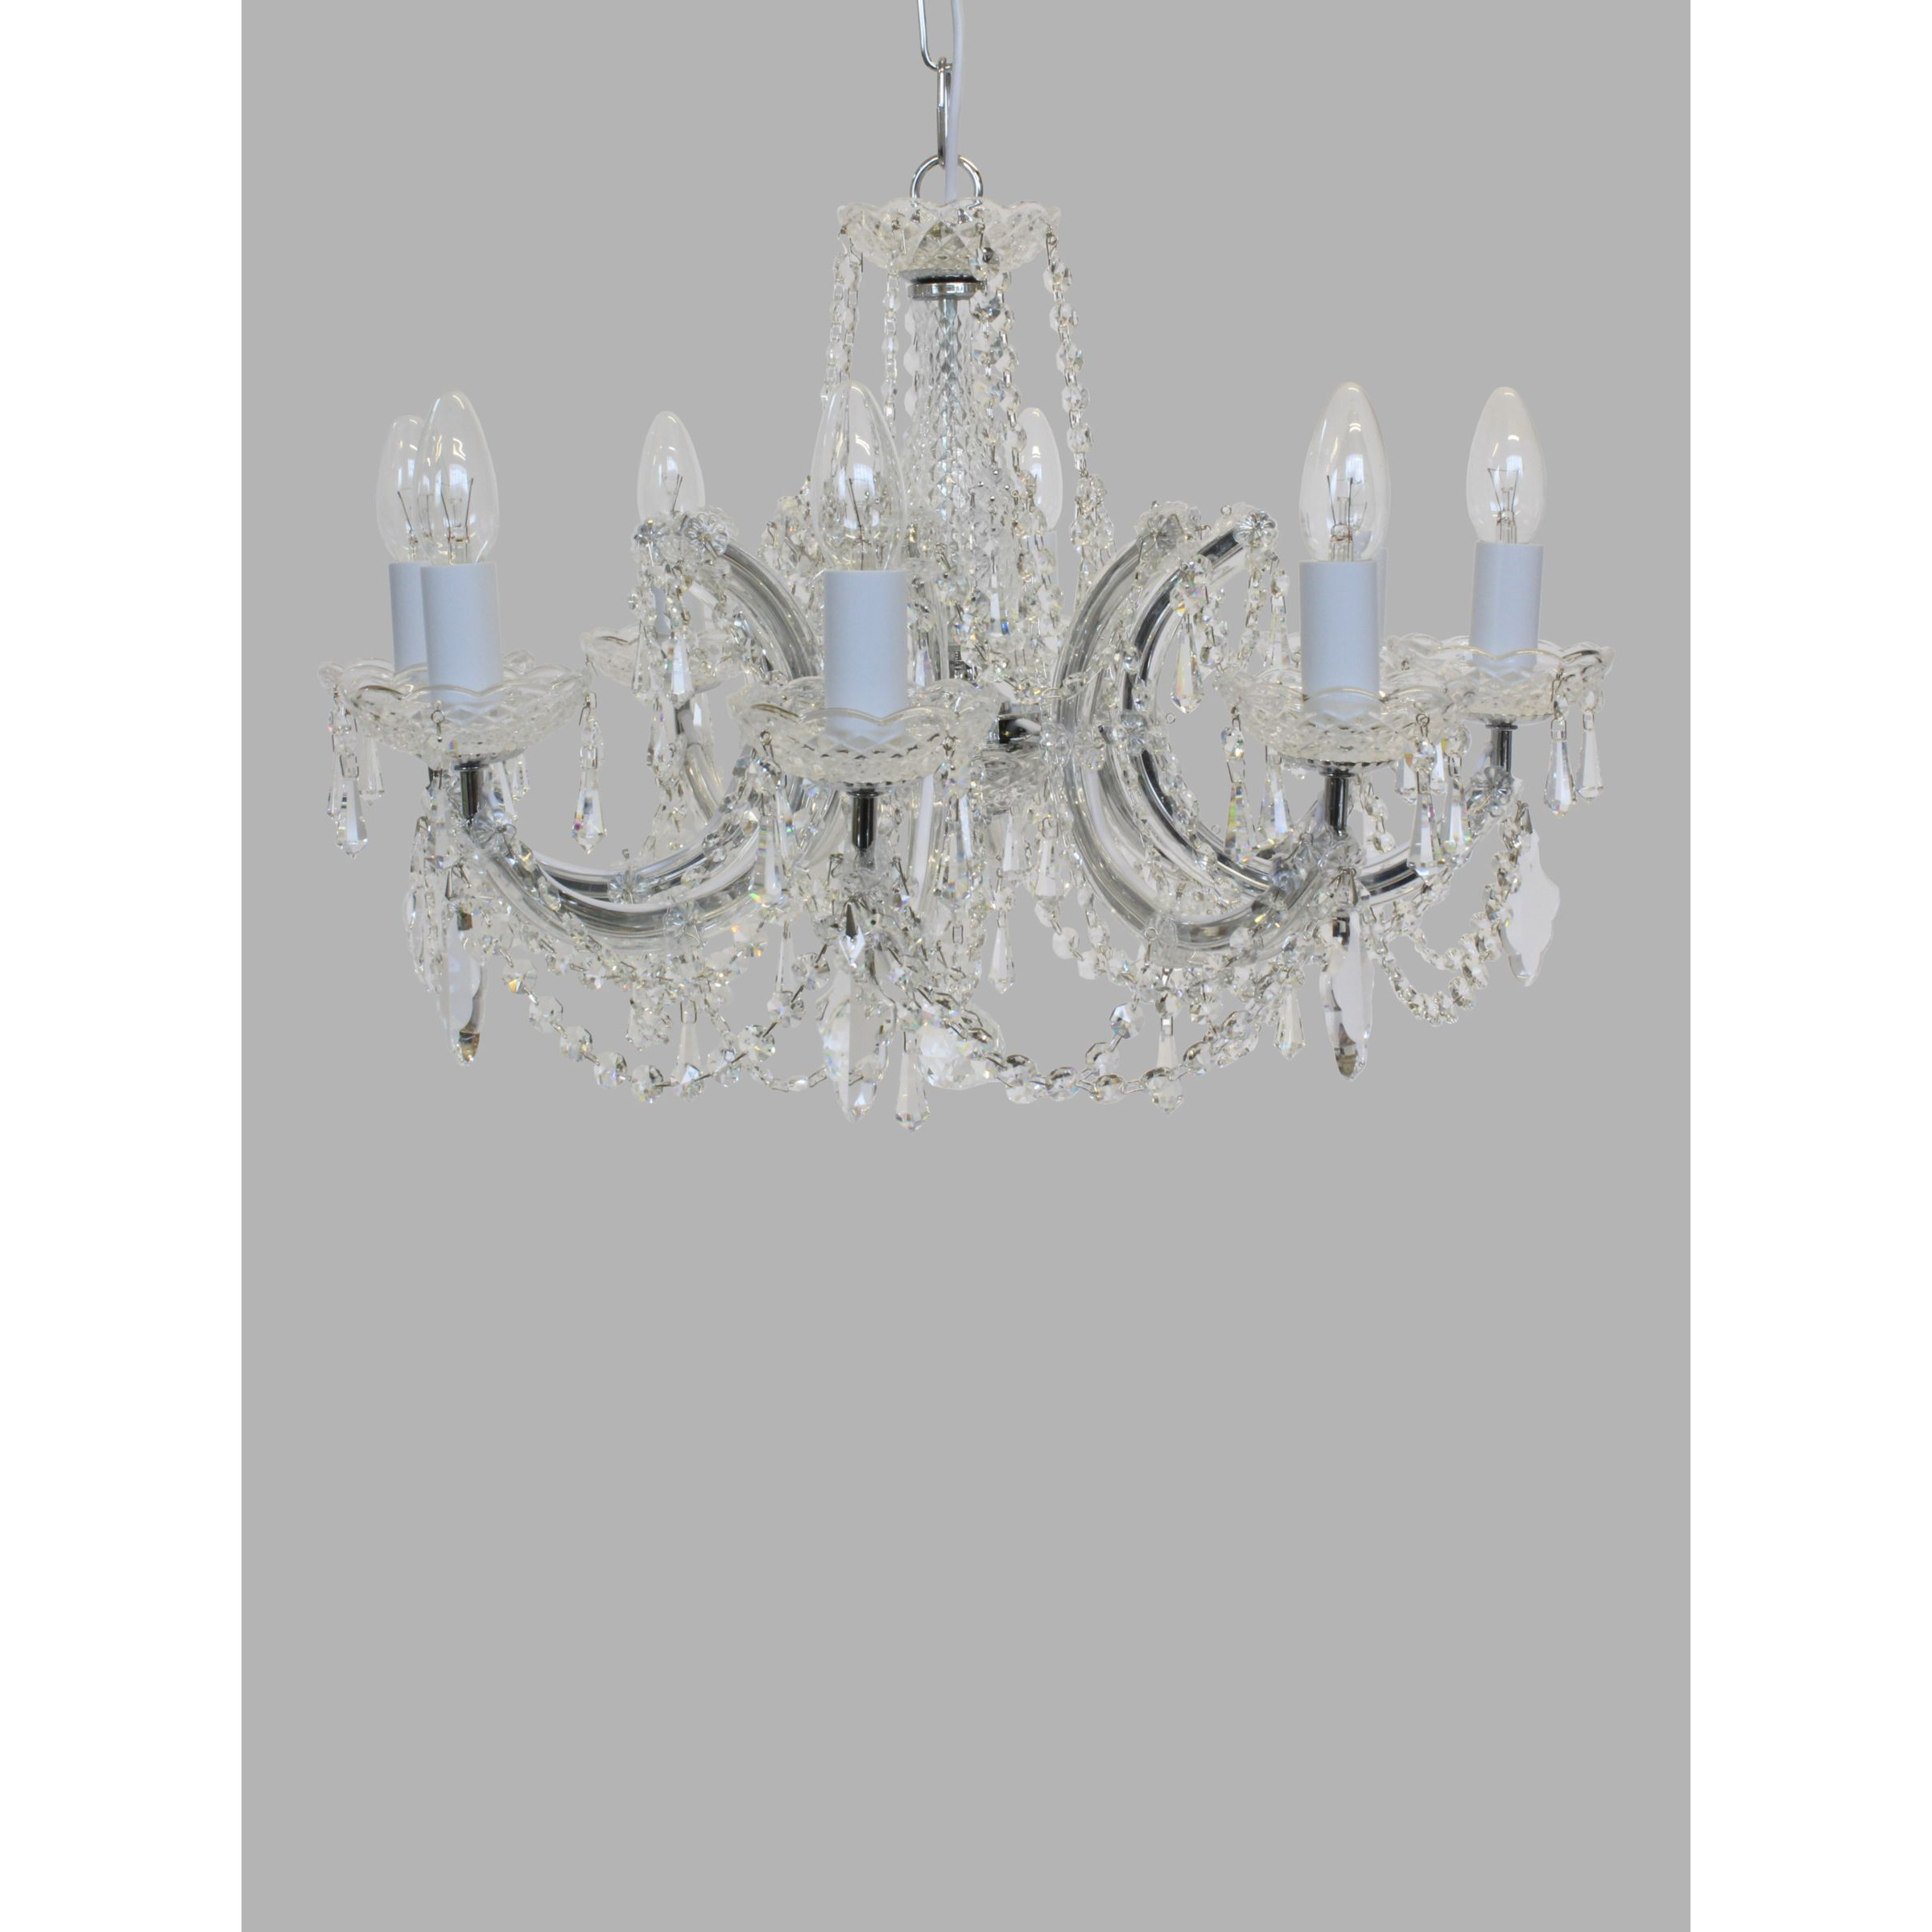 Impex Marie Theresa Crystal Chandelier Ceiling Light, 8 Arms - image 1